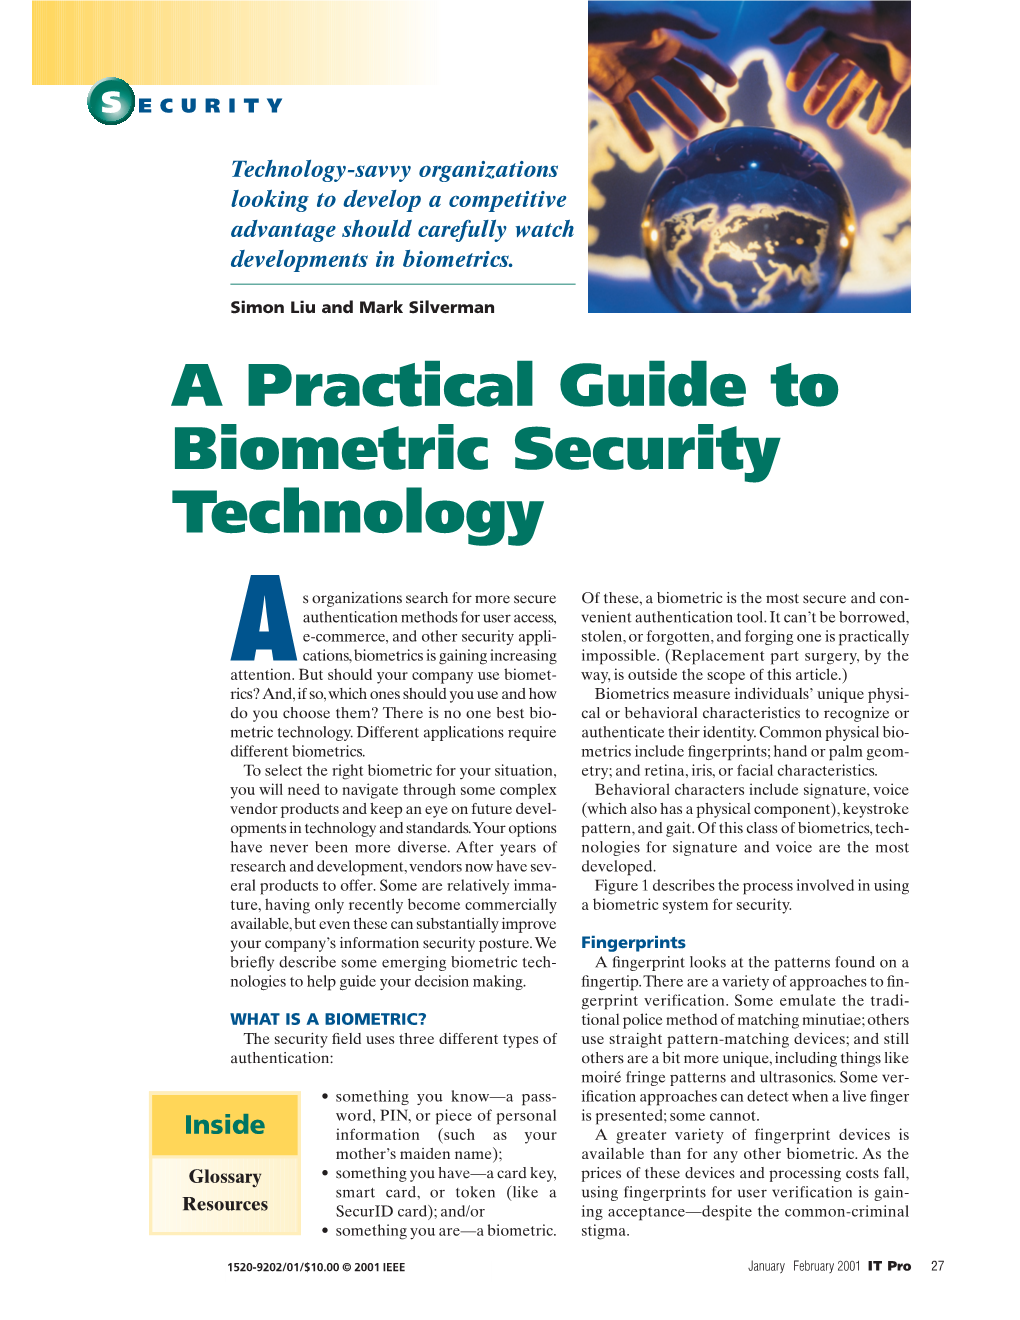 A Practical Guide to Biometric Security Technology